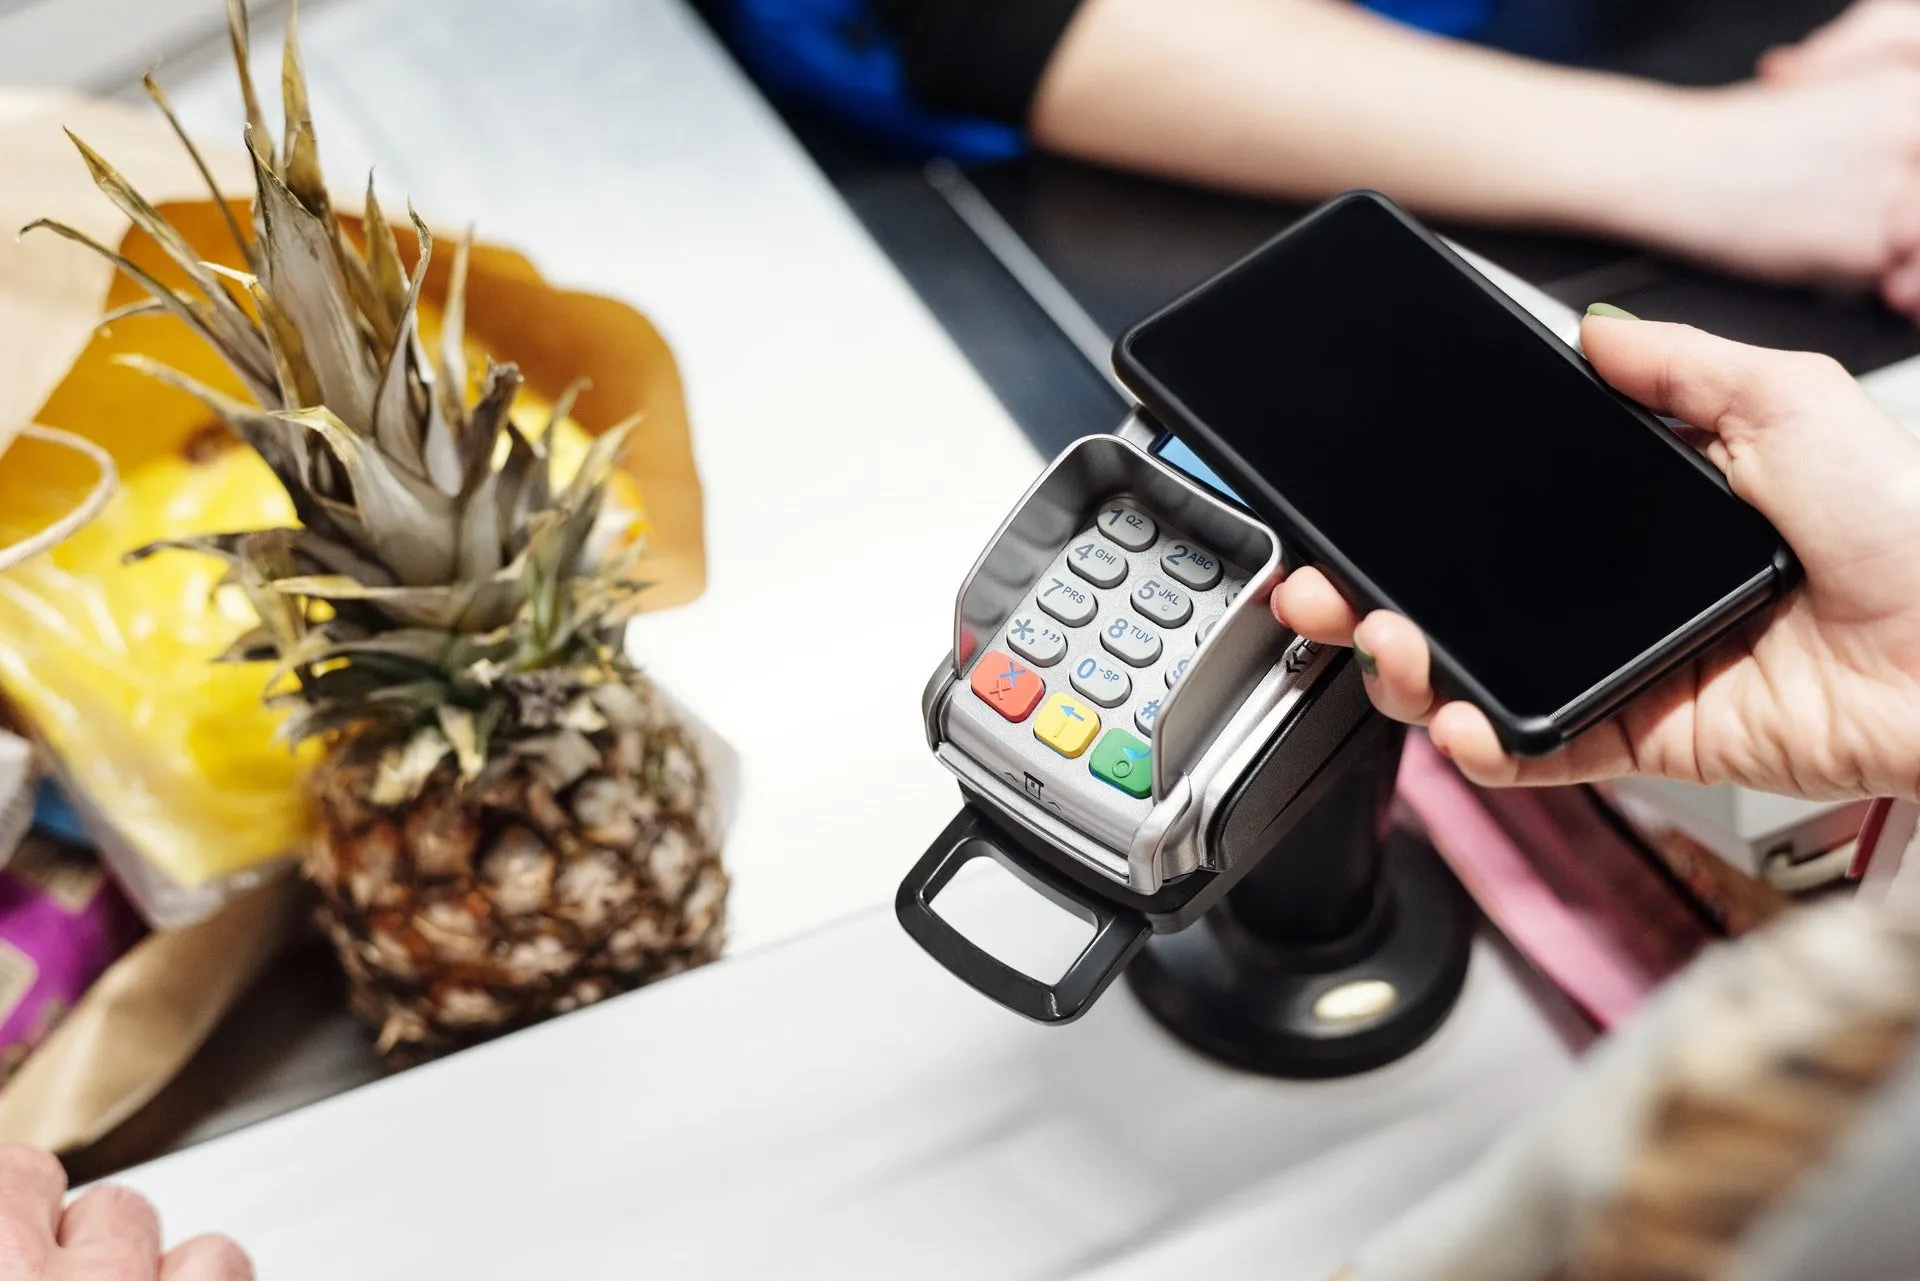 The role of smartphones in the growth of mobile payments